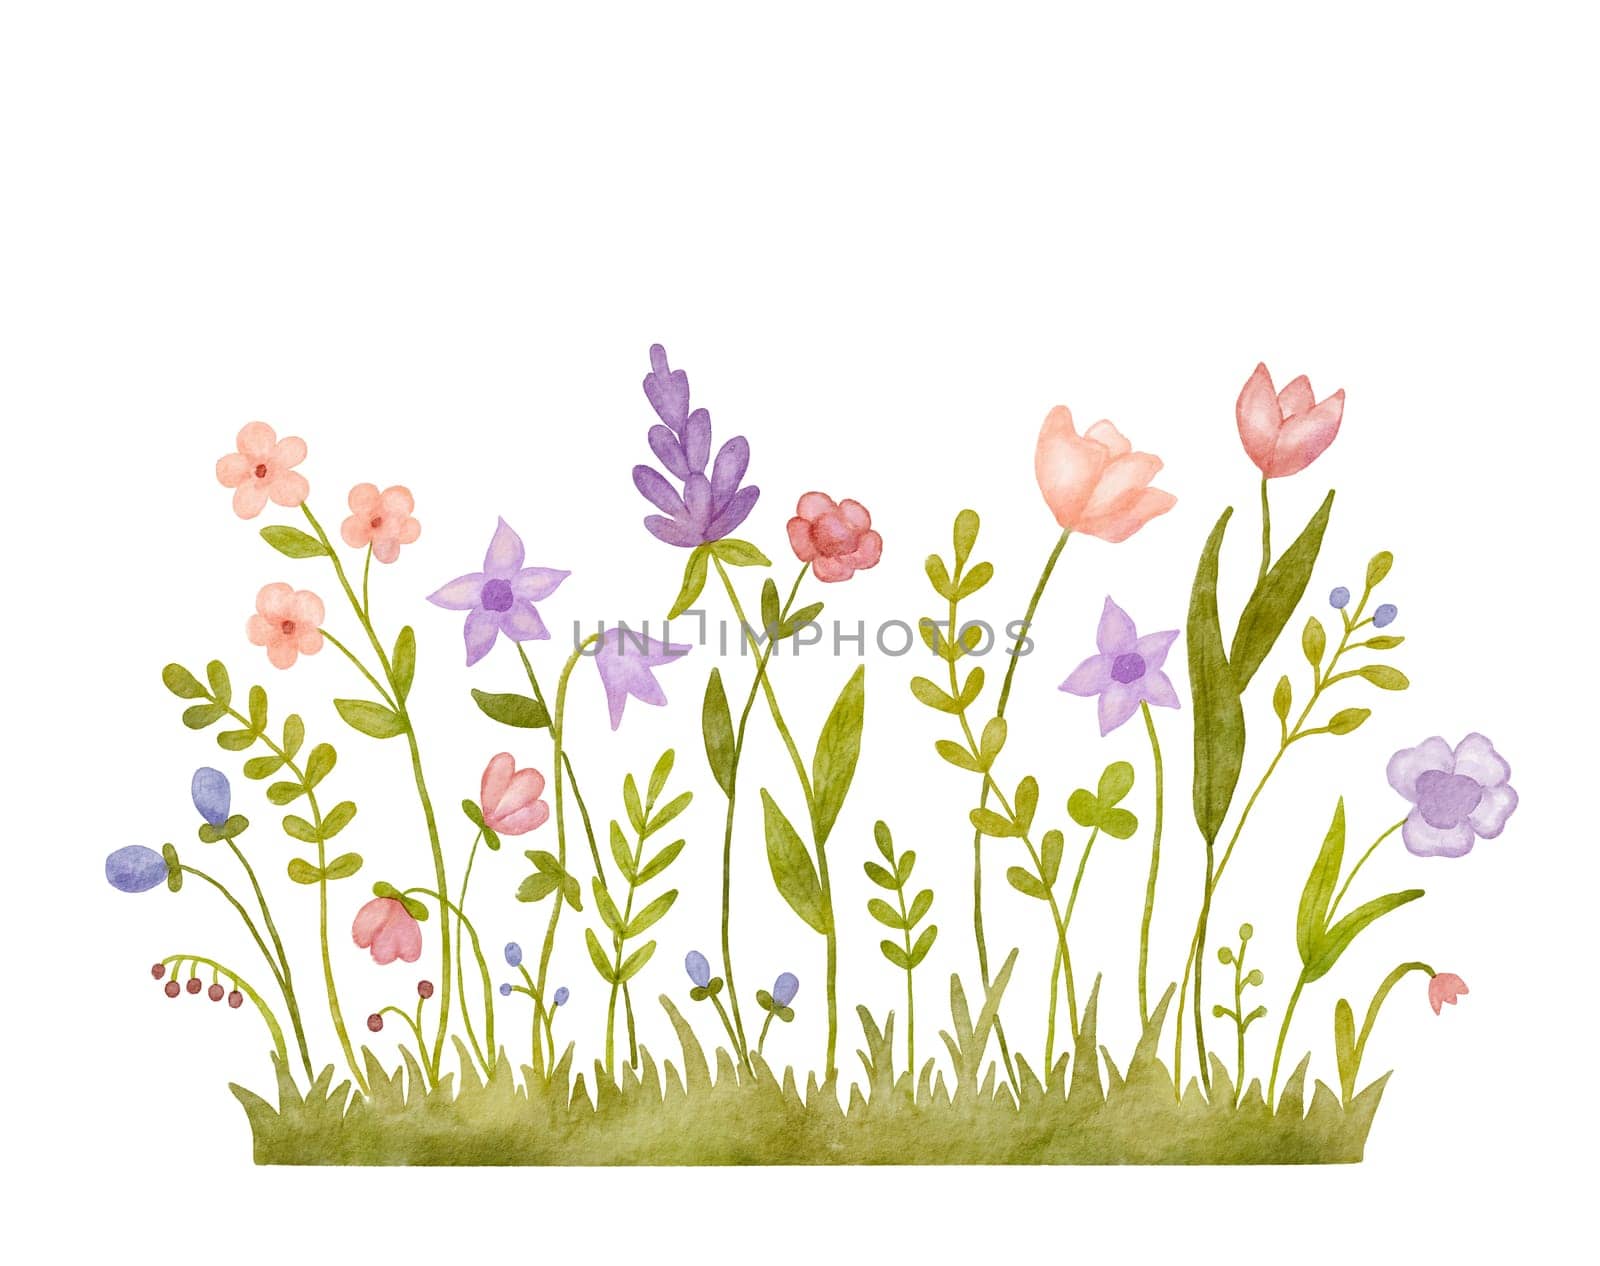 Watercolor wild herbs and abstract flowers illustration. Hand painted meadow with grass and wildflowers isolated on white background